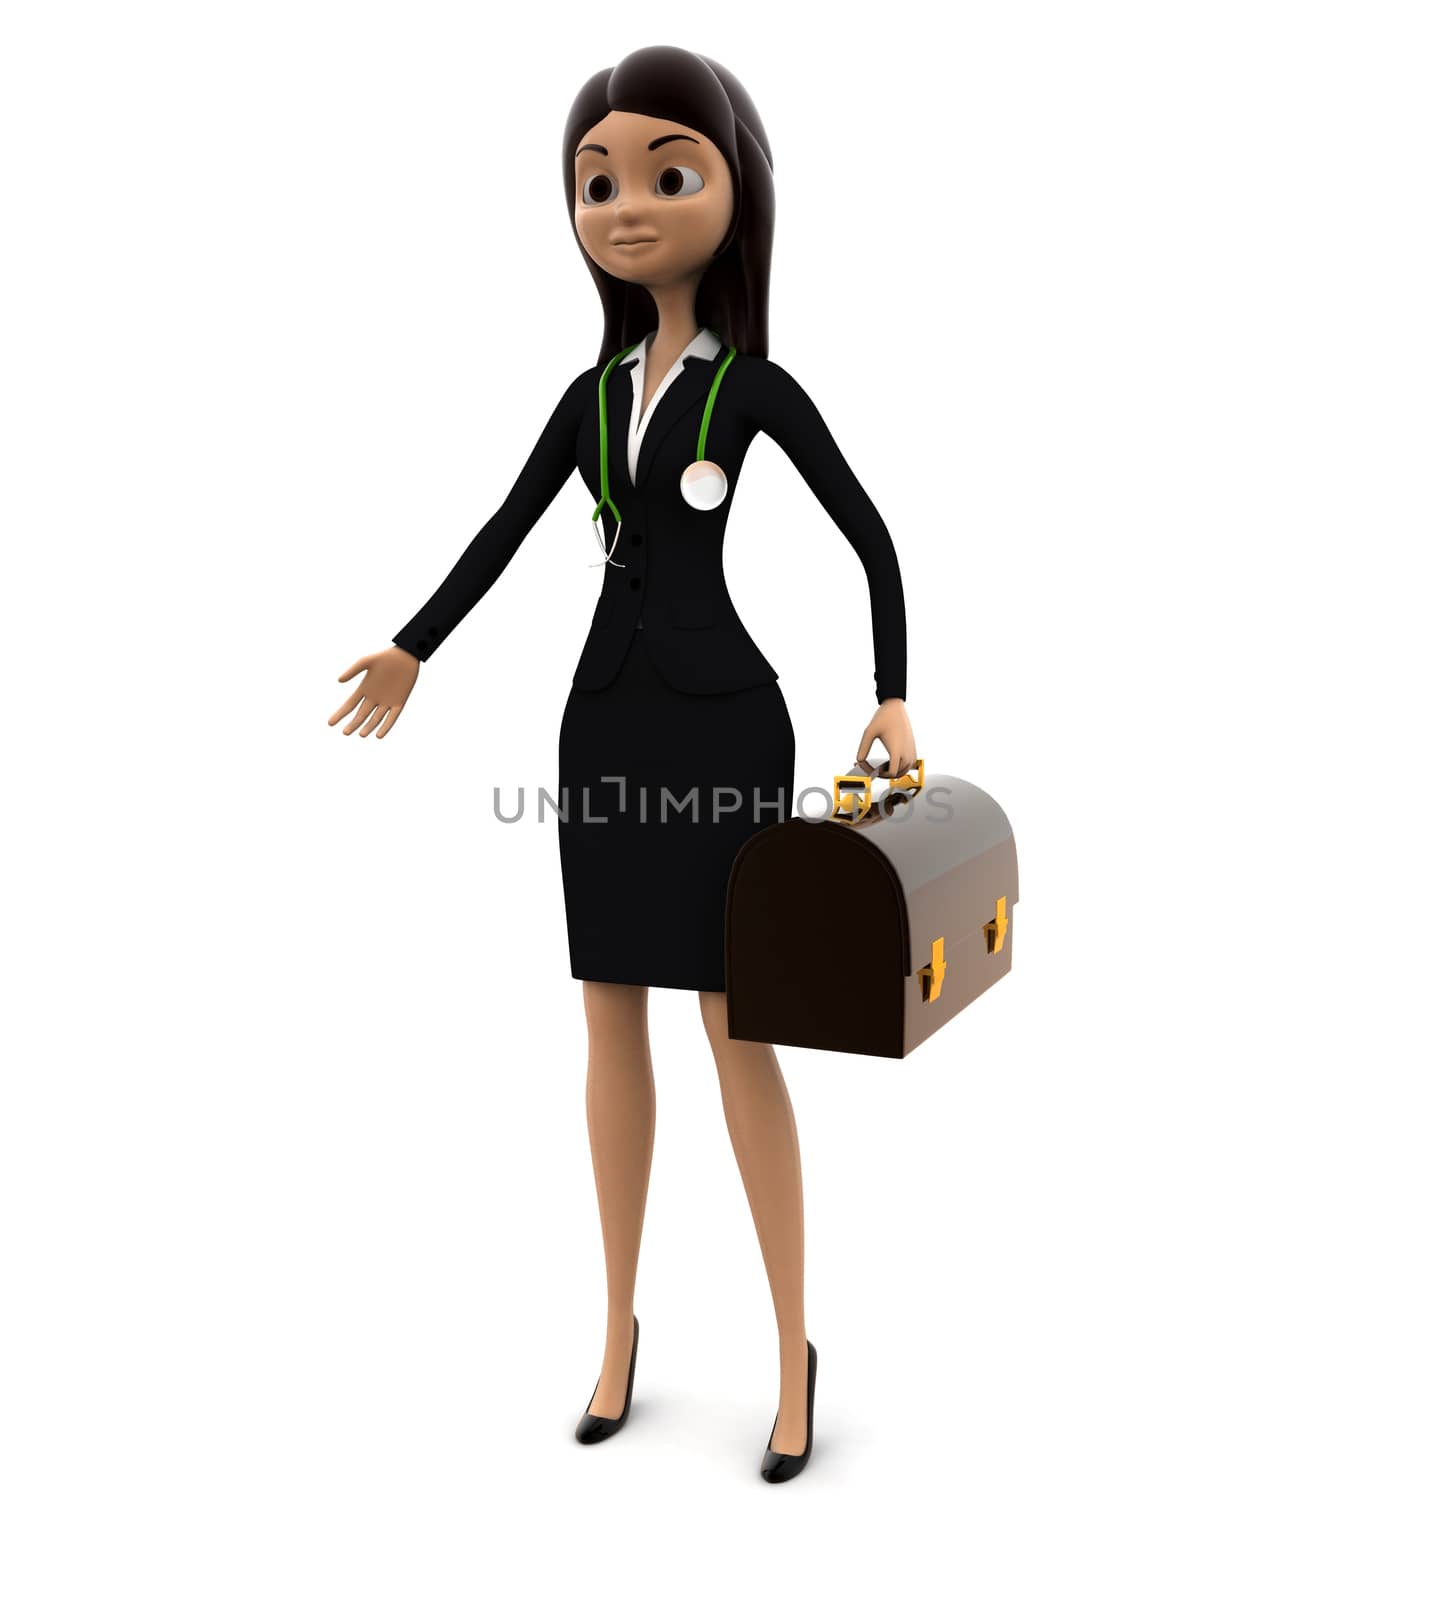 3d woman stanidng with brown bag and strethoscope on neck concept on white background, side angle view